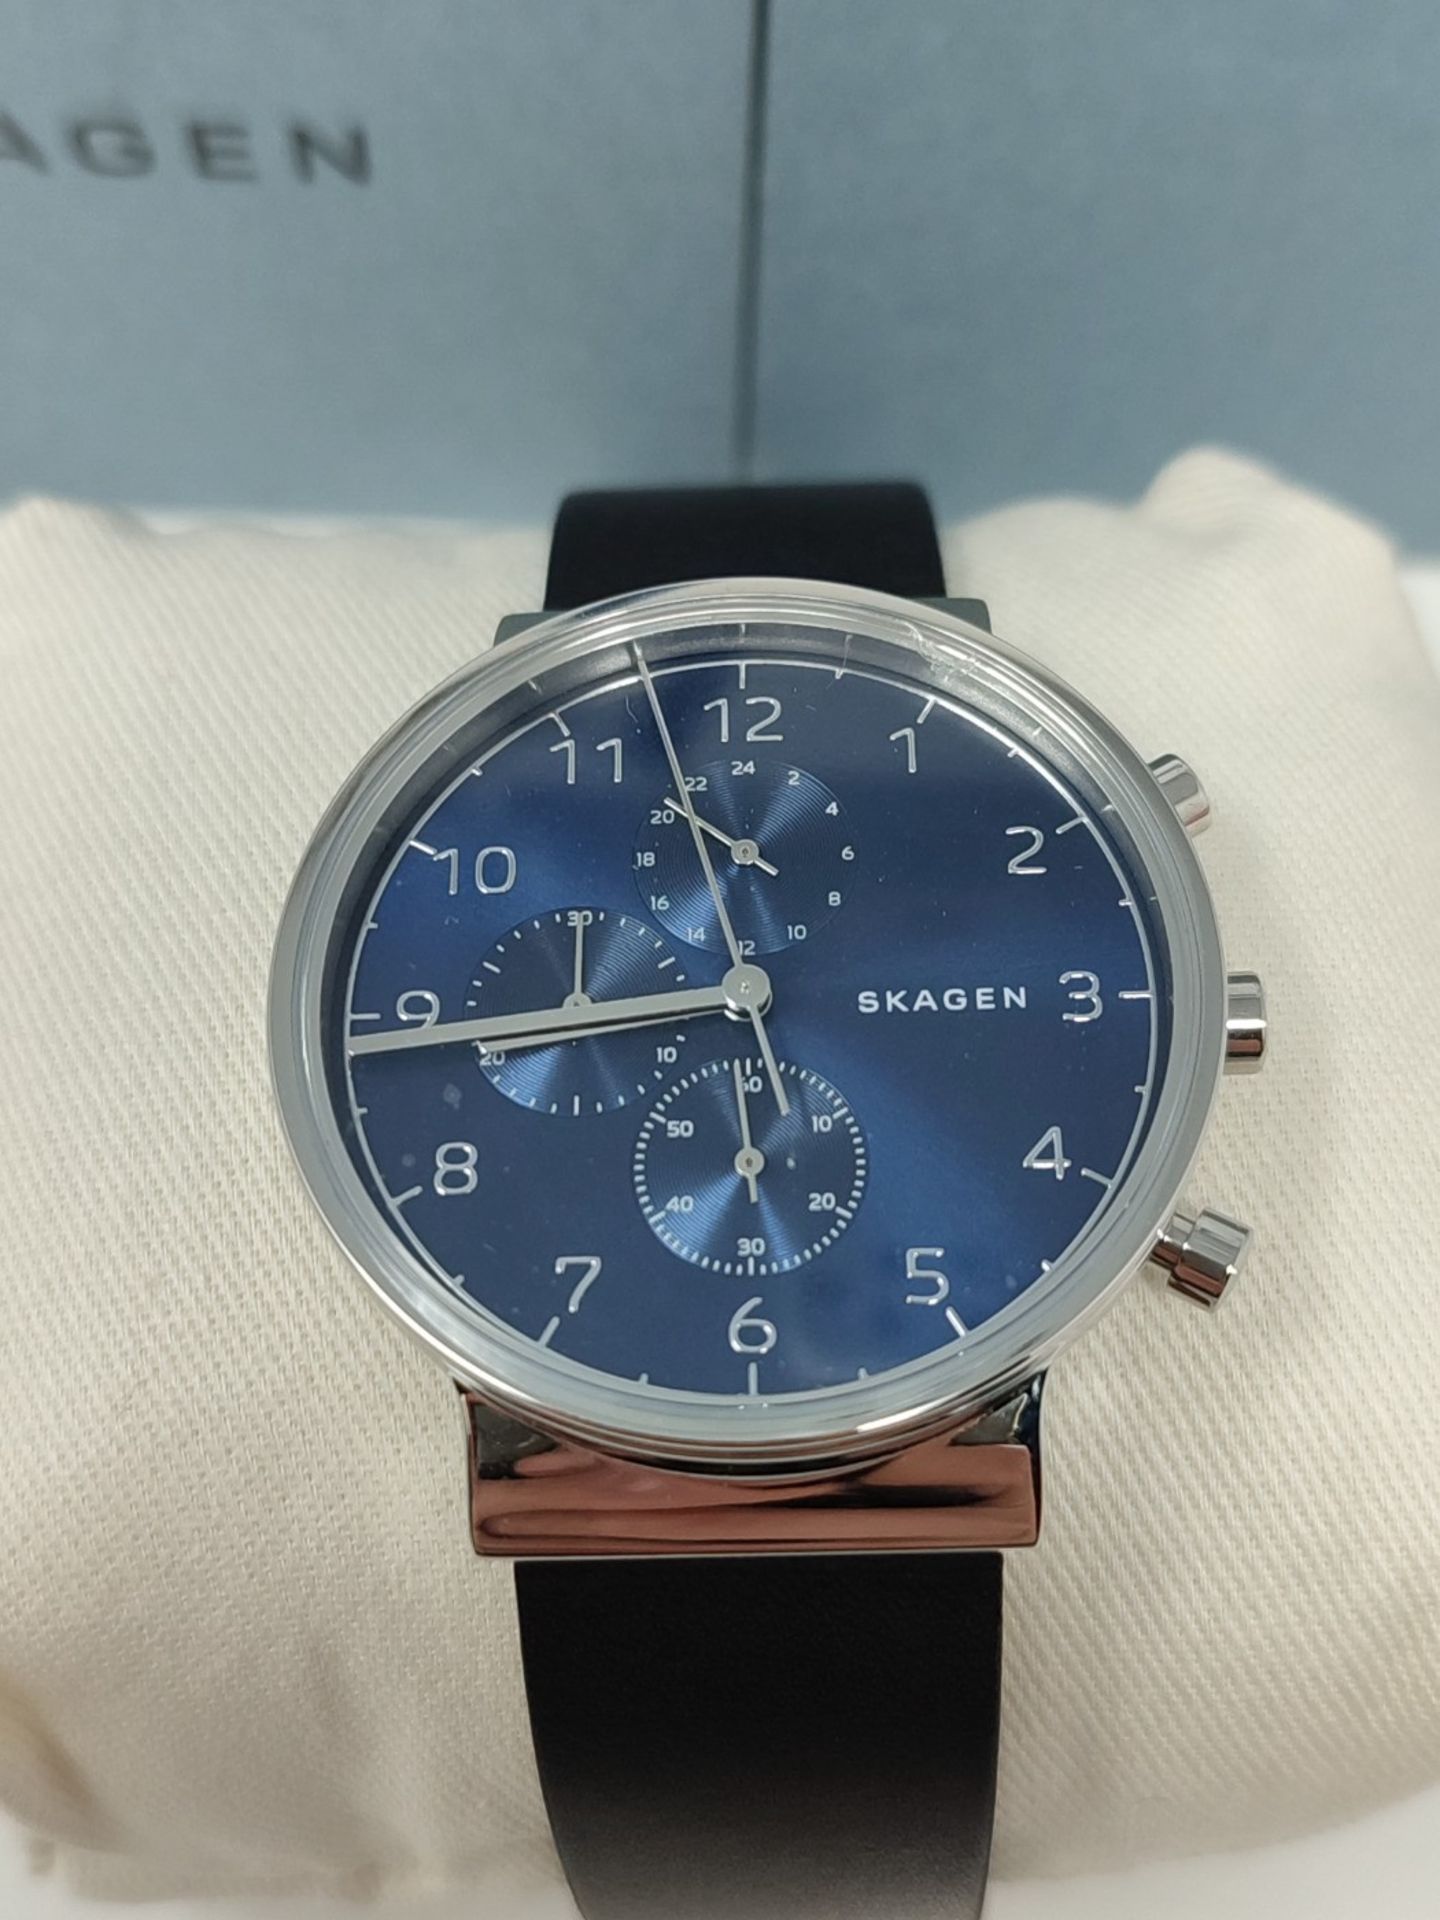 RRP £149.00 Skagen Mens Chronograph Quartz Watch with Leather Strap - Image 2 of 2